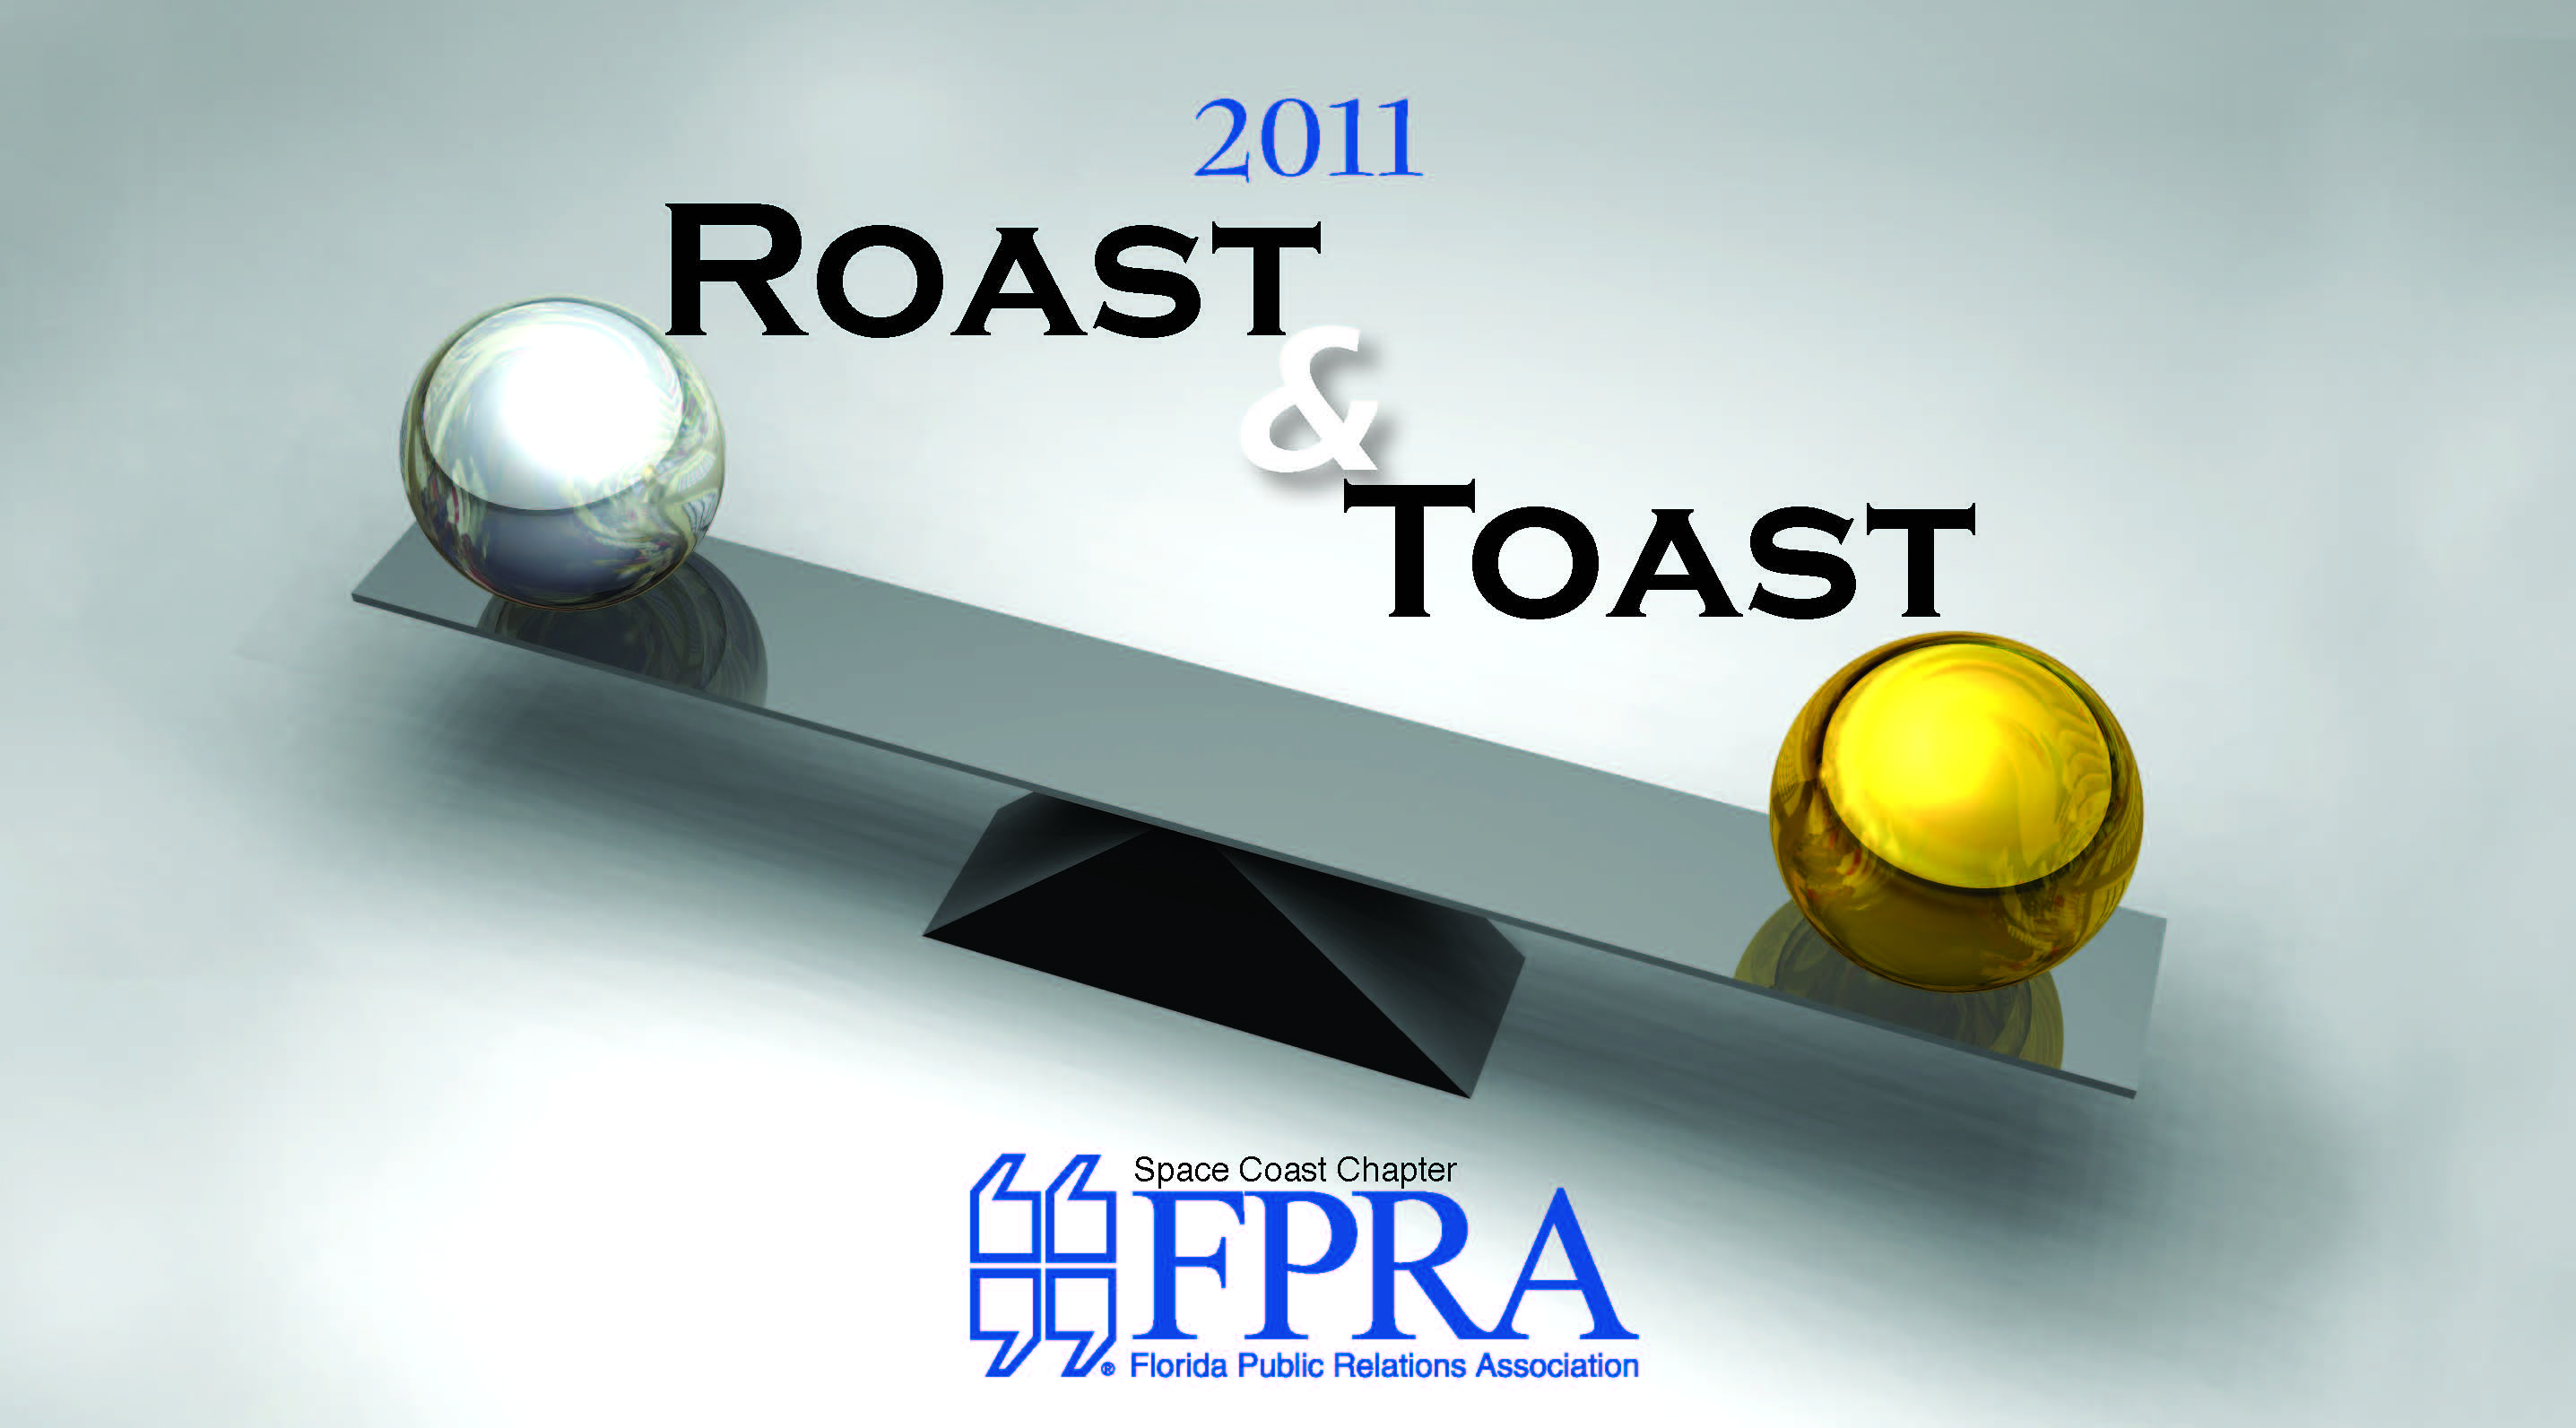 Save the Date for the 2011 FPRA Roast & Toast